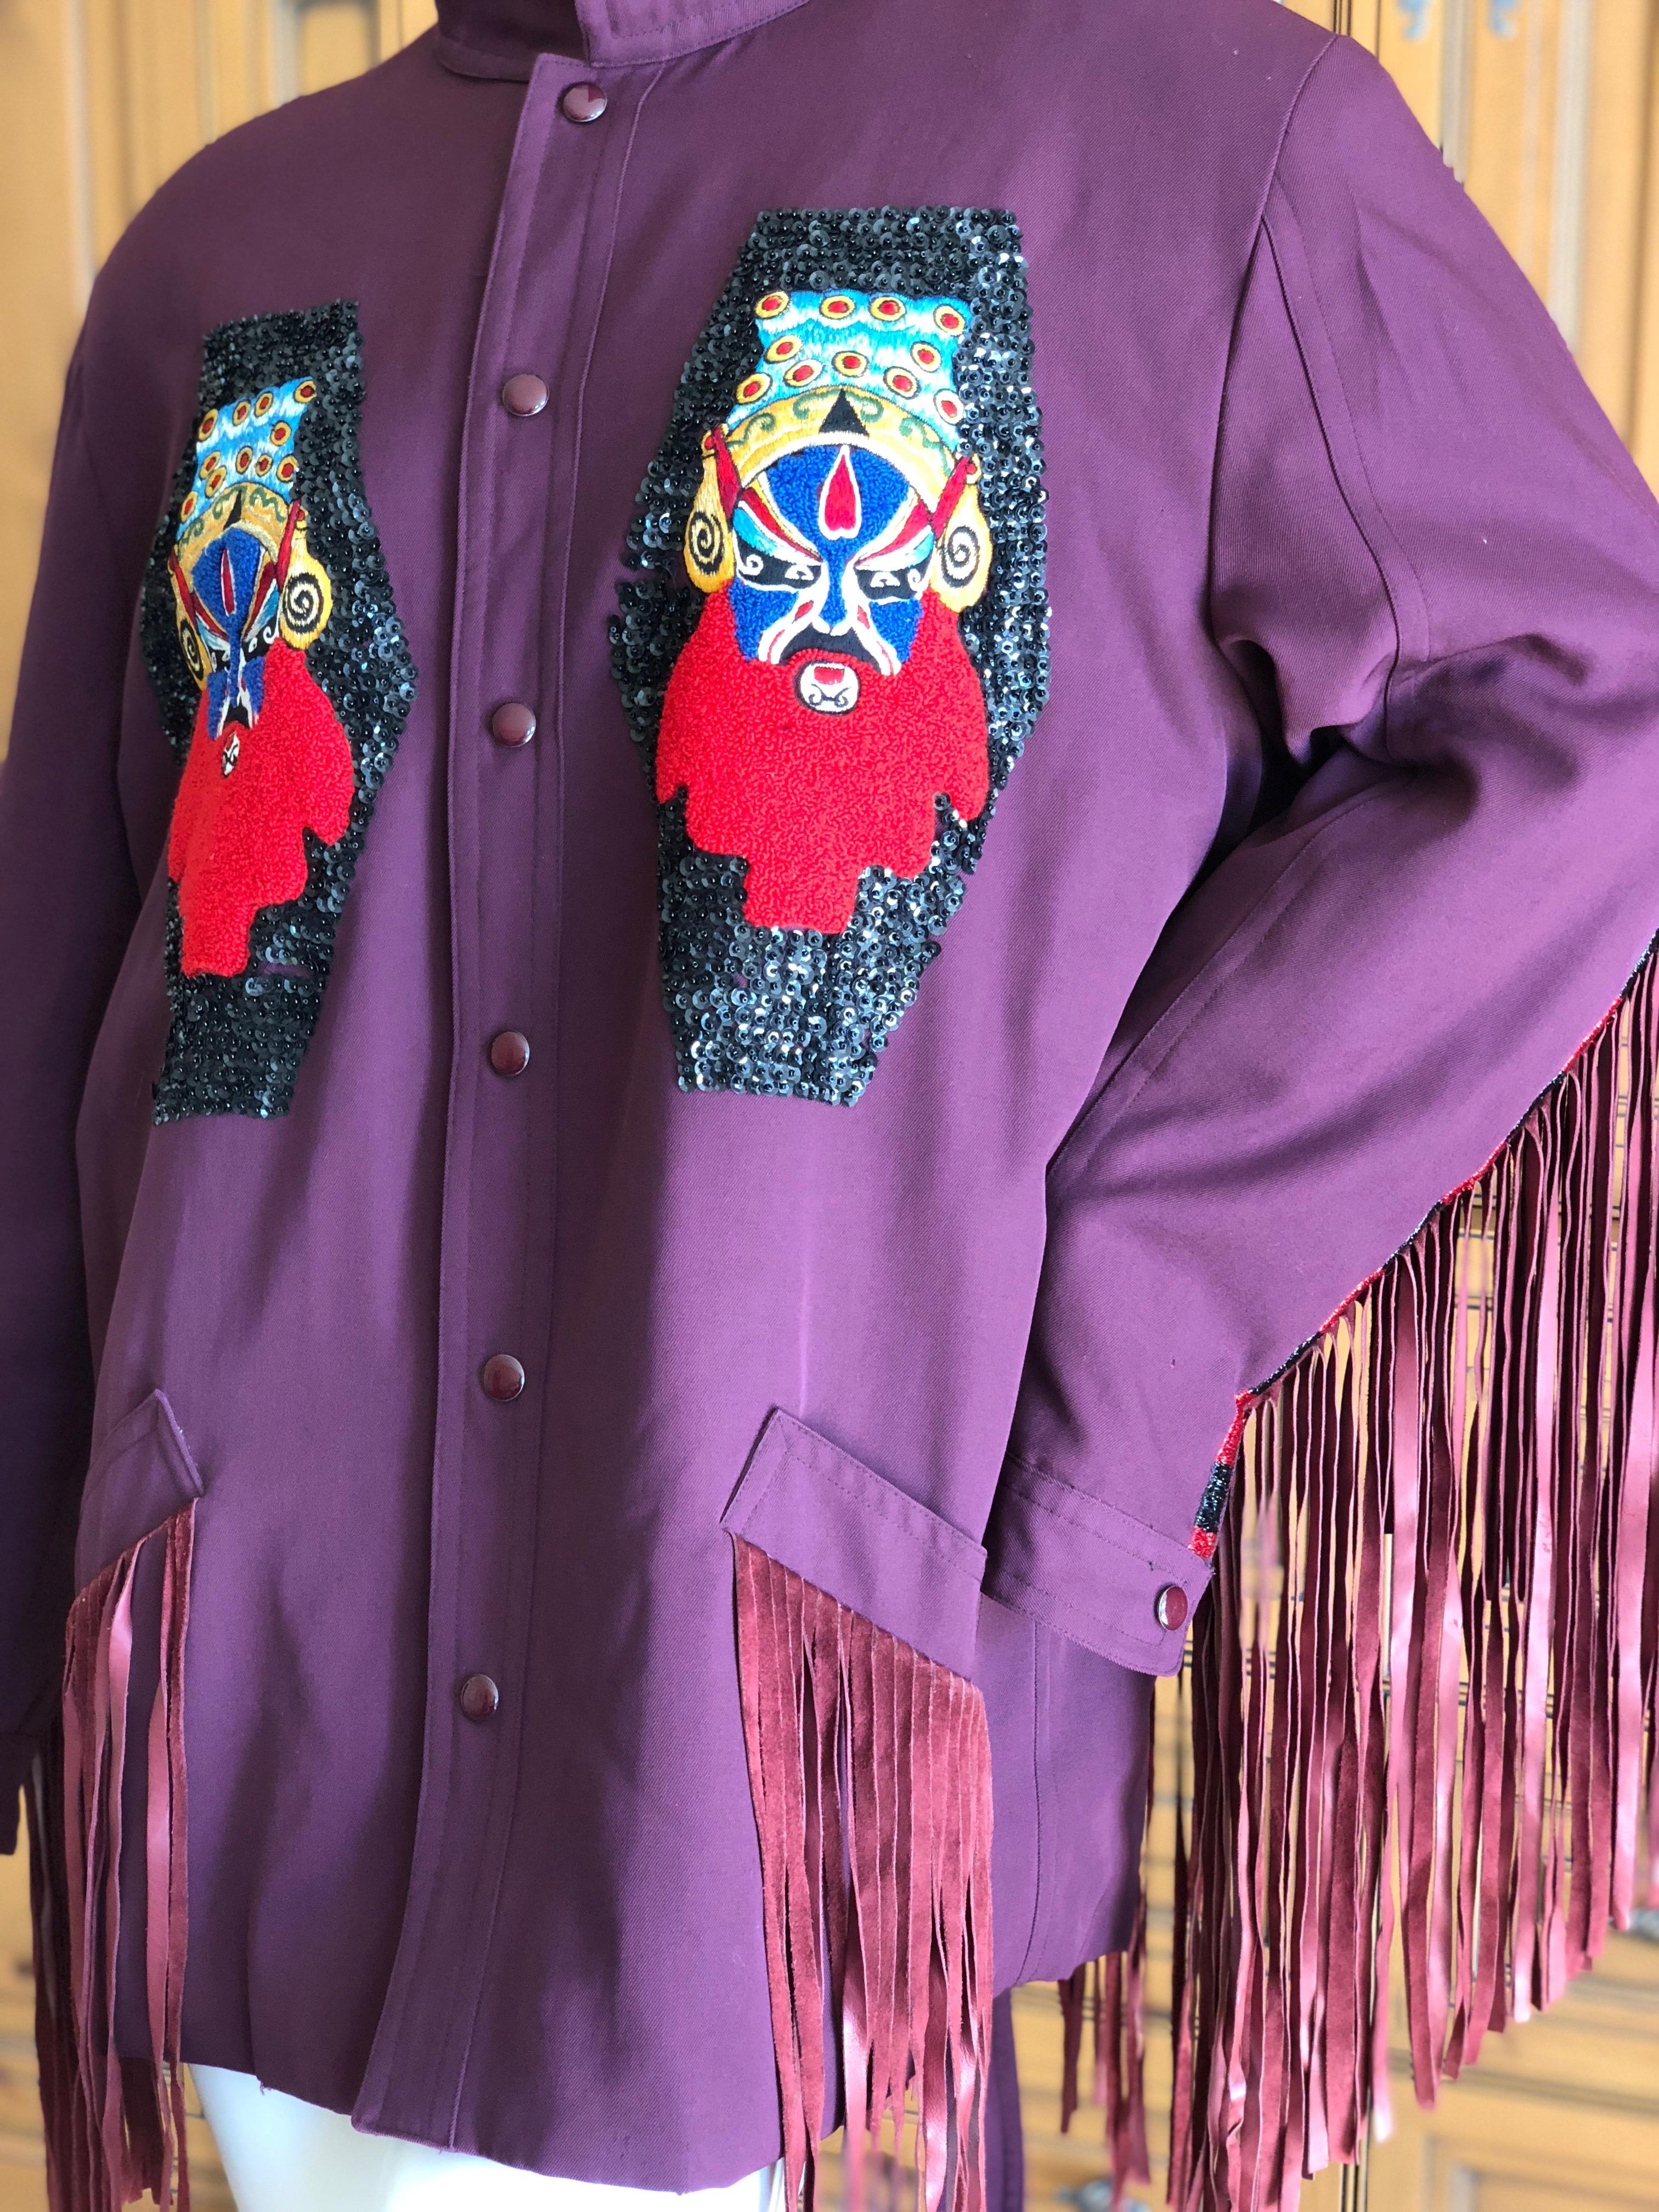 KANSAI YAMAMOTO 1981 Rare Collectible Unisex Embellished Jacket w Suede Fringe In Good Condition For Sale In Cloverdale, CA